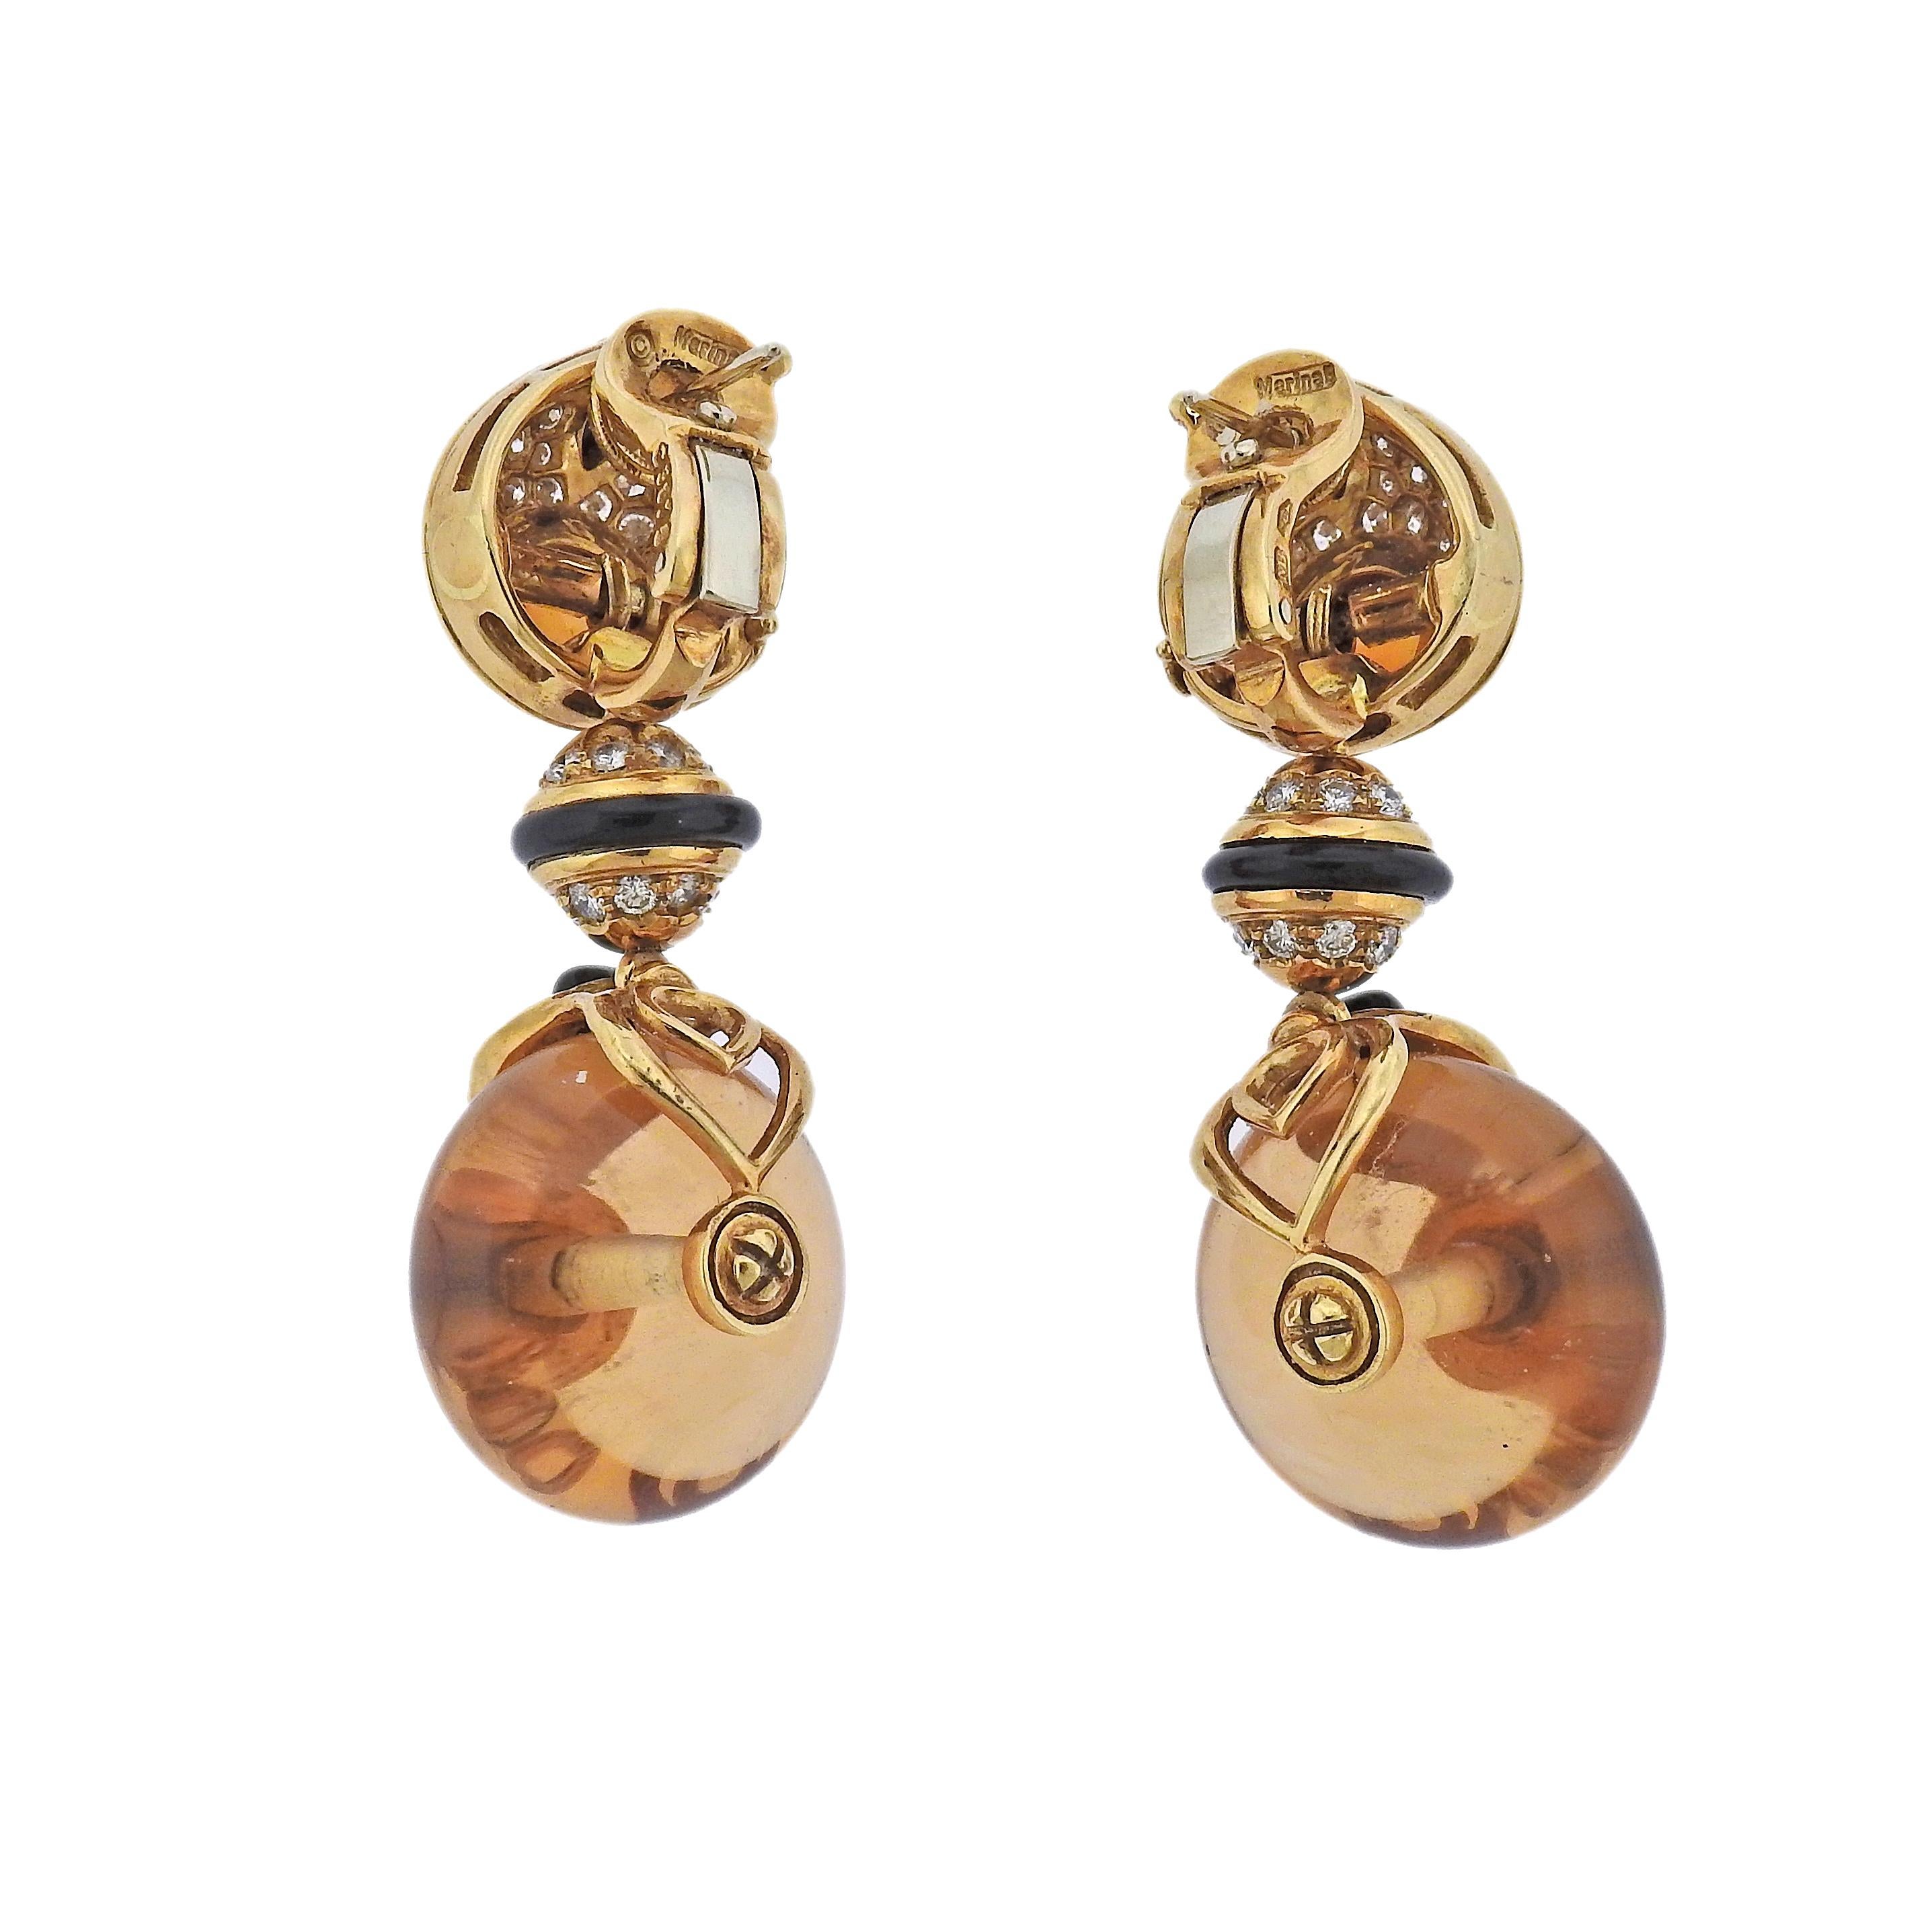 Pair of 18k gold Marina B drop earrings, with onyx, citrines and approx. 1.50ctw in G/VS diamonds. Earrings measure 50mm x 20mm. Marked: Marina B, MB, 750, C3875. Weight - 43.9 grams.